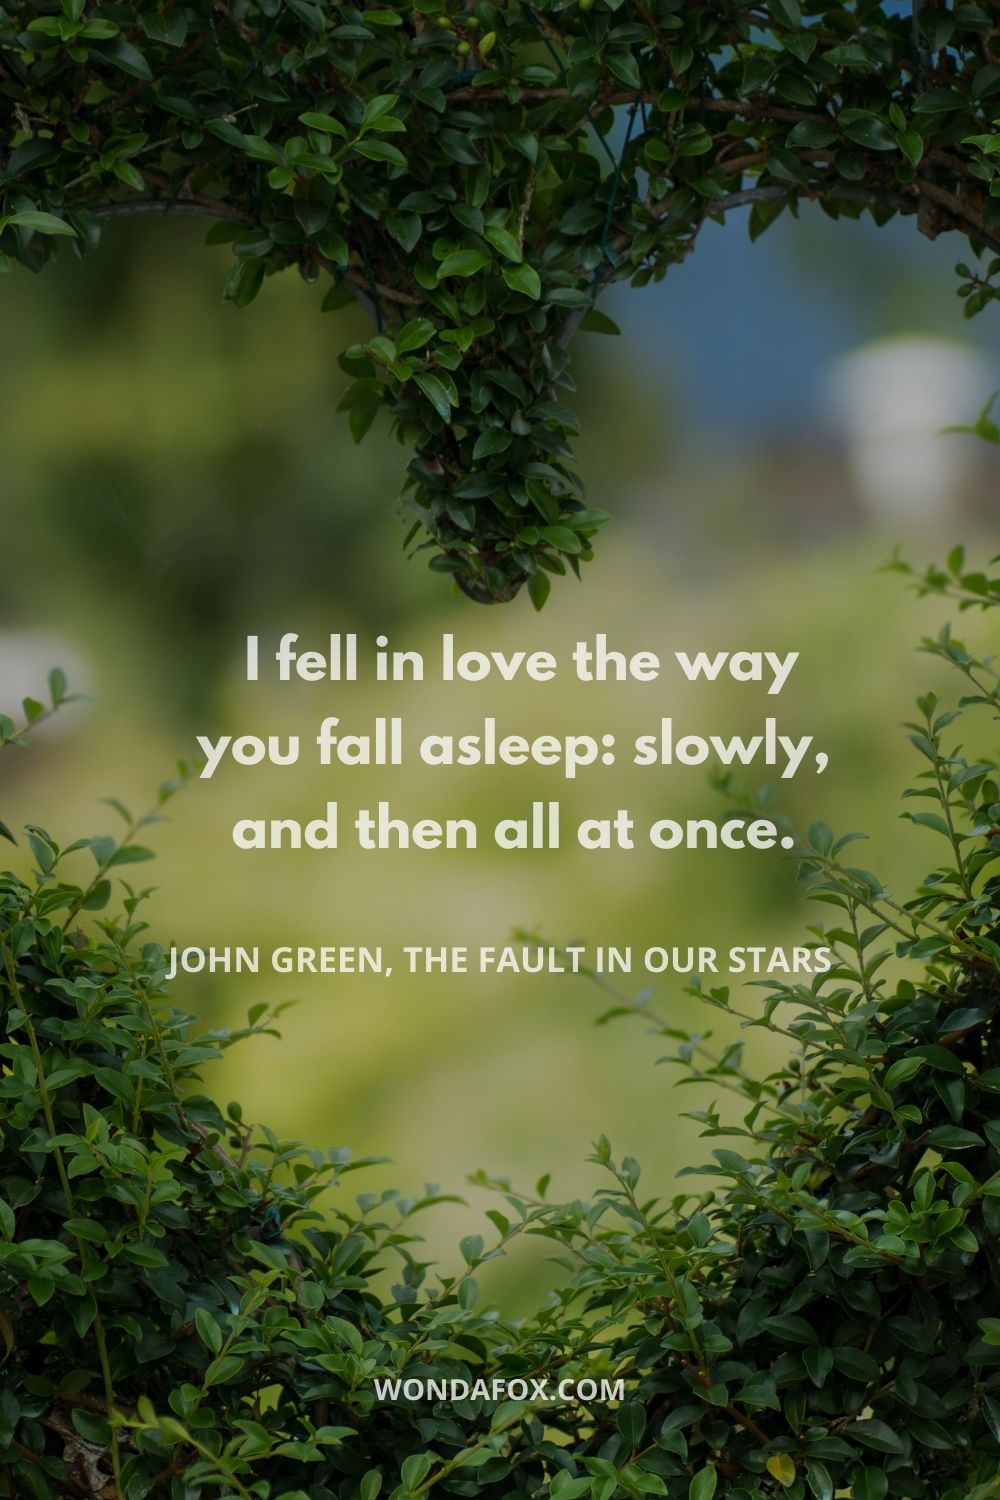  I fell in love the way you fall asleep: slowly, and then all at once.